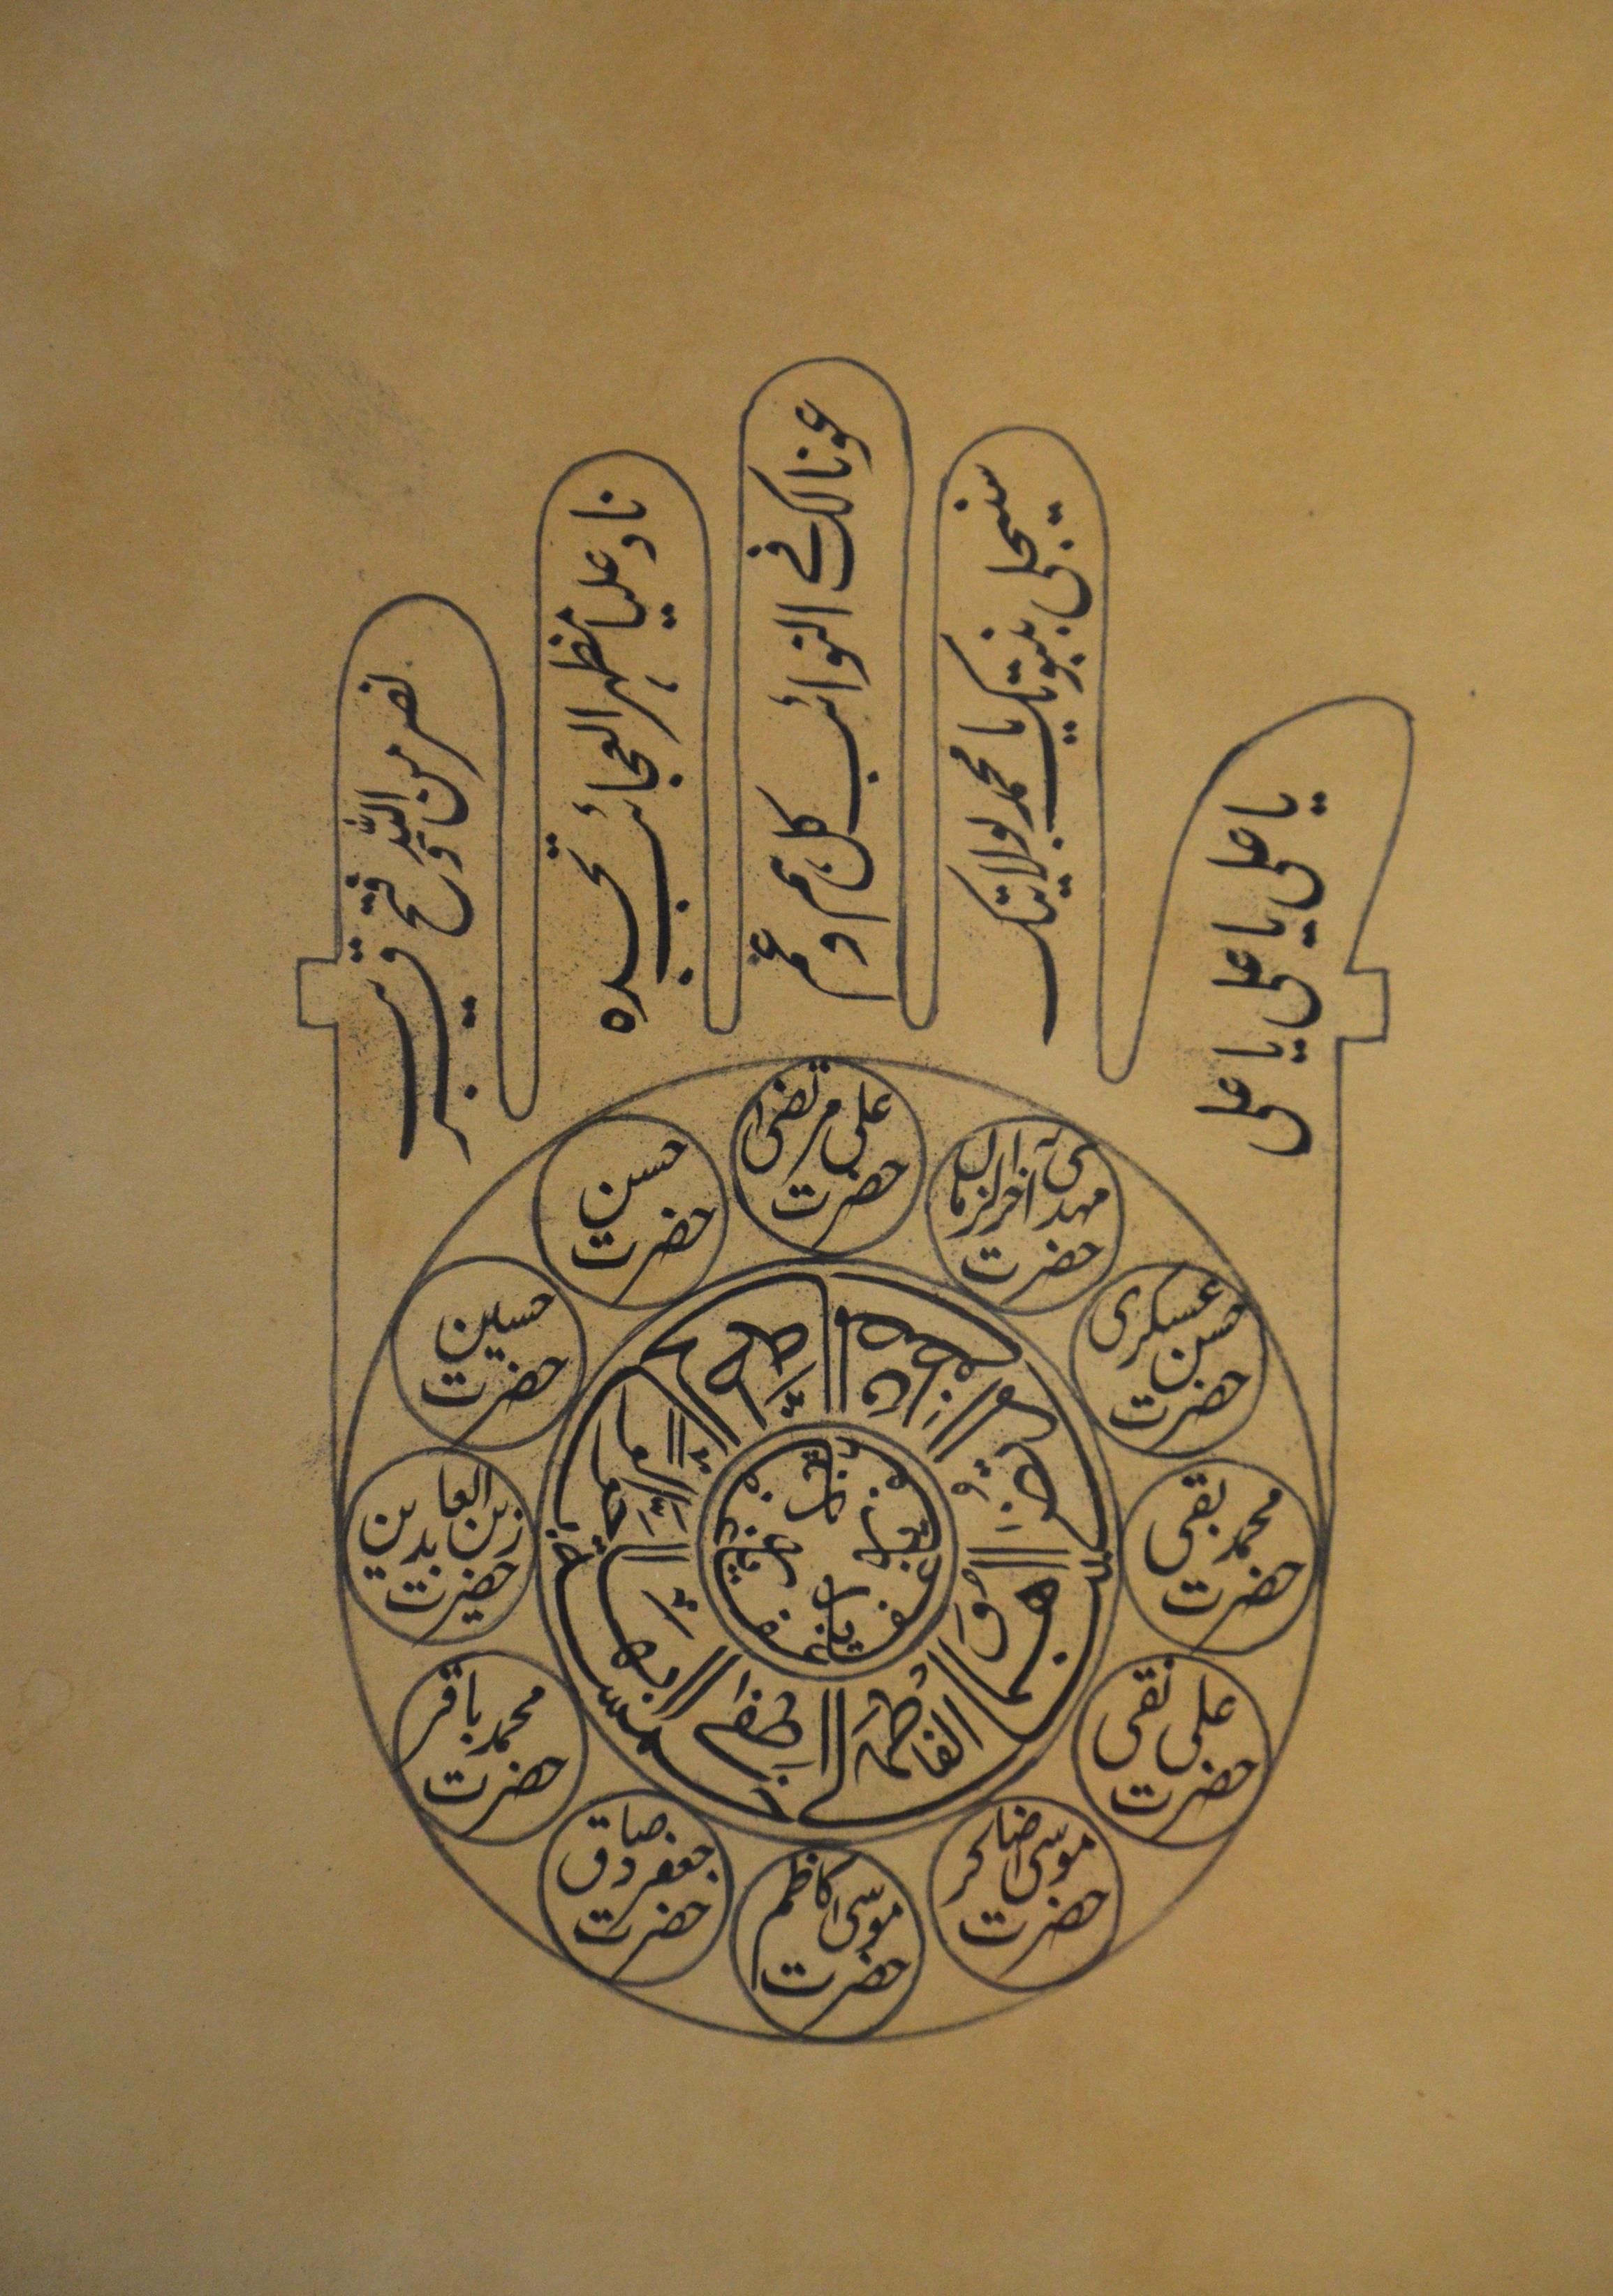 Astrological Hand-Painted on Parchment Print Depicting a Hand with Calligraphy In Good Condition For Sale In Yonkers, NY